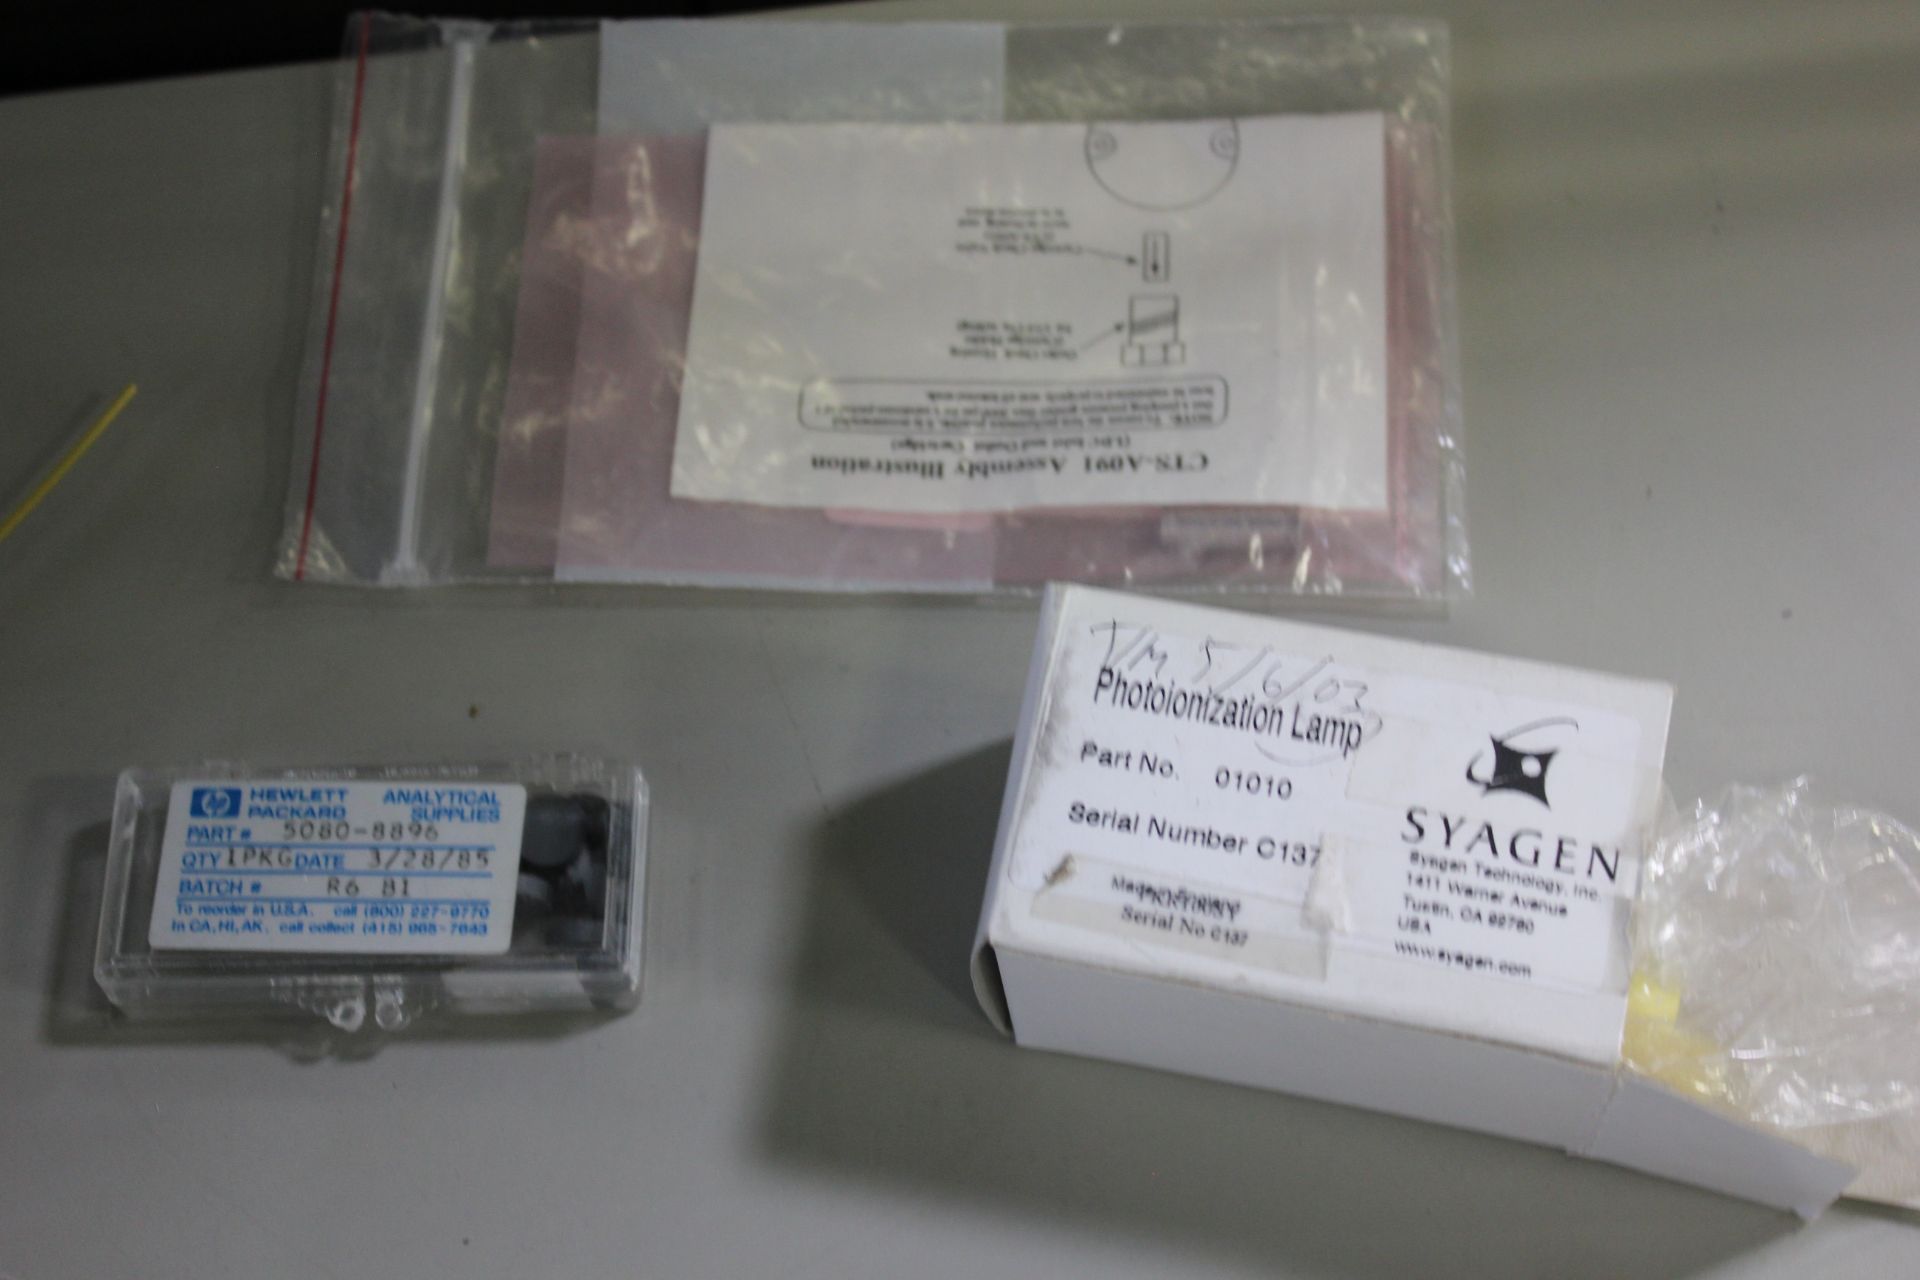 LOT OF HPLC PARTS - FITTINGS, TUBING, ETC - Image 12 of 13